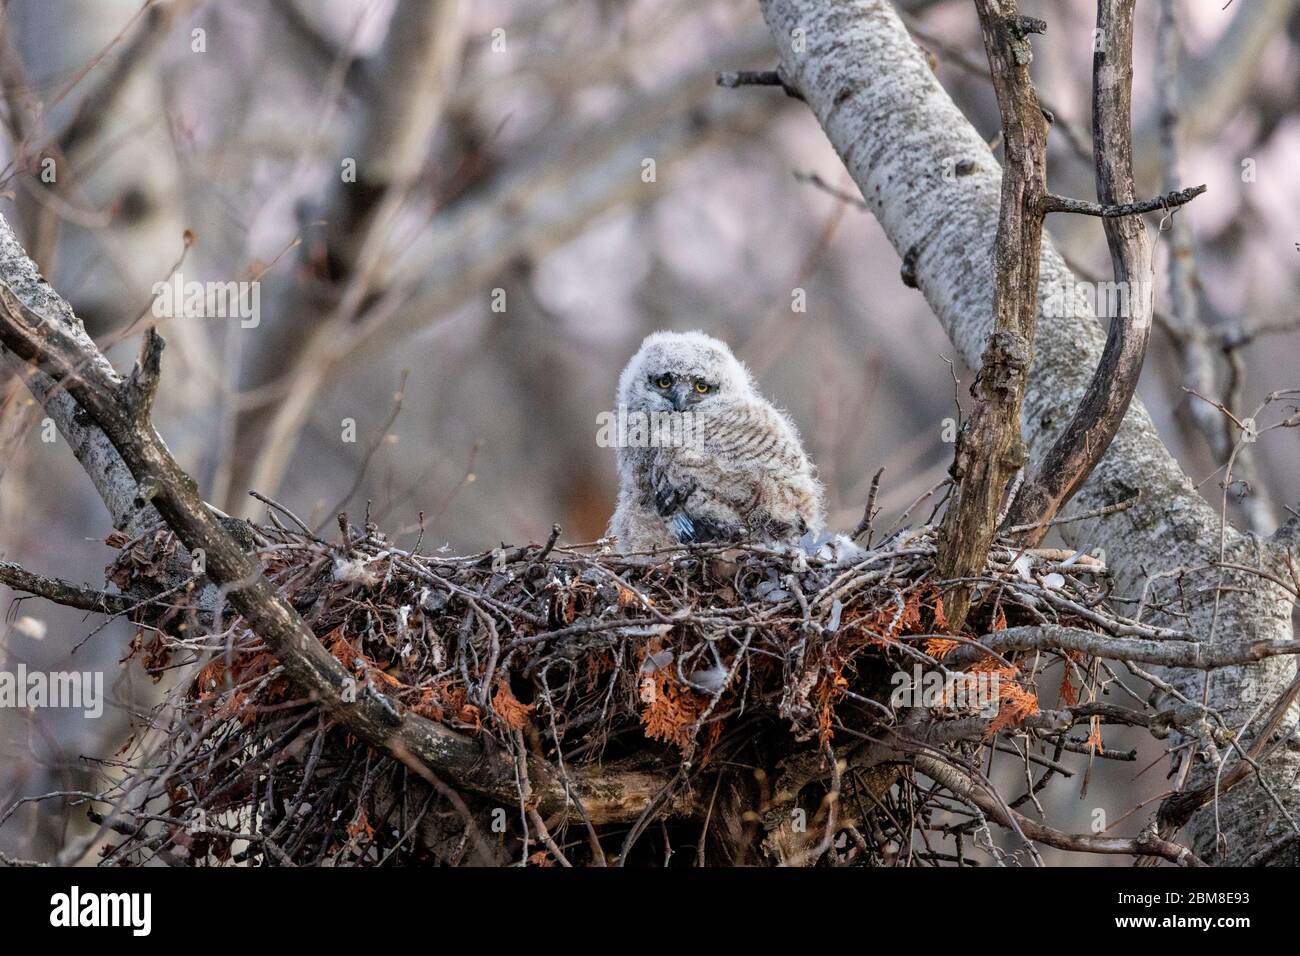 A wild nestling Great Horned Owlet ( Bubo Virginianus ), part of the Strigiformes order, and Strigidae family sits in a stick nest. Stock Photo